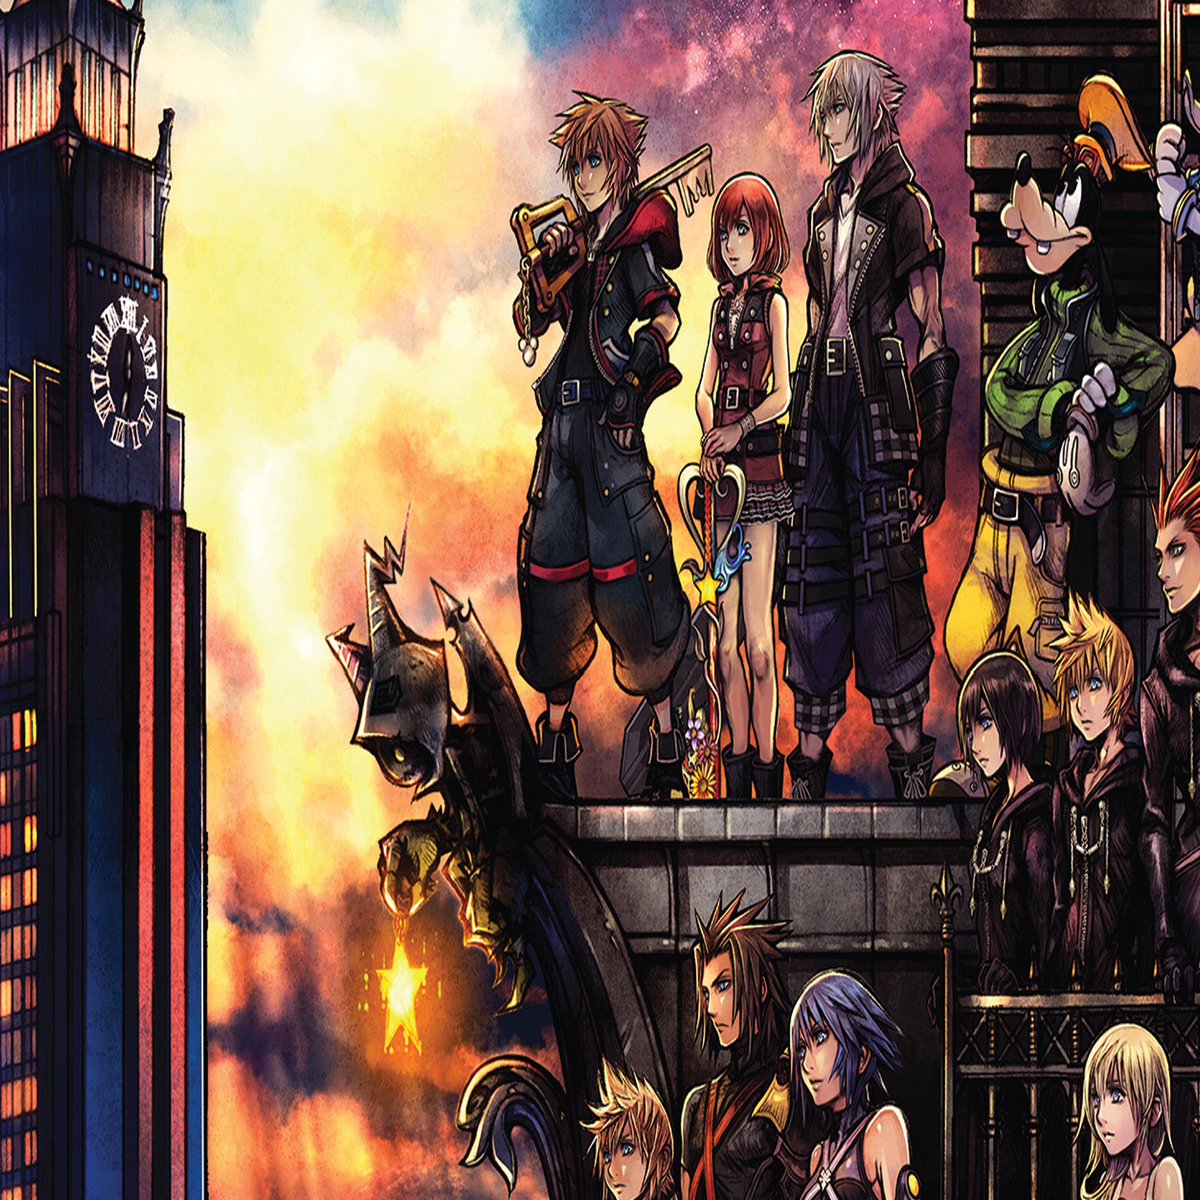 Kingdom Hearts 3 review - a grand finale that's both torturous and